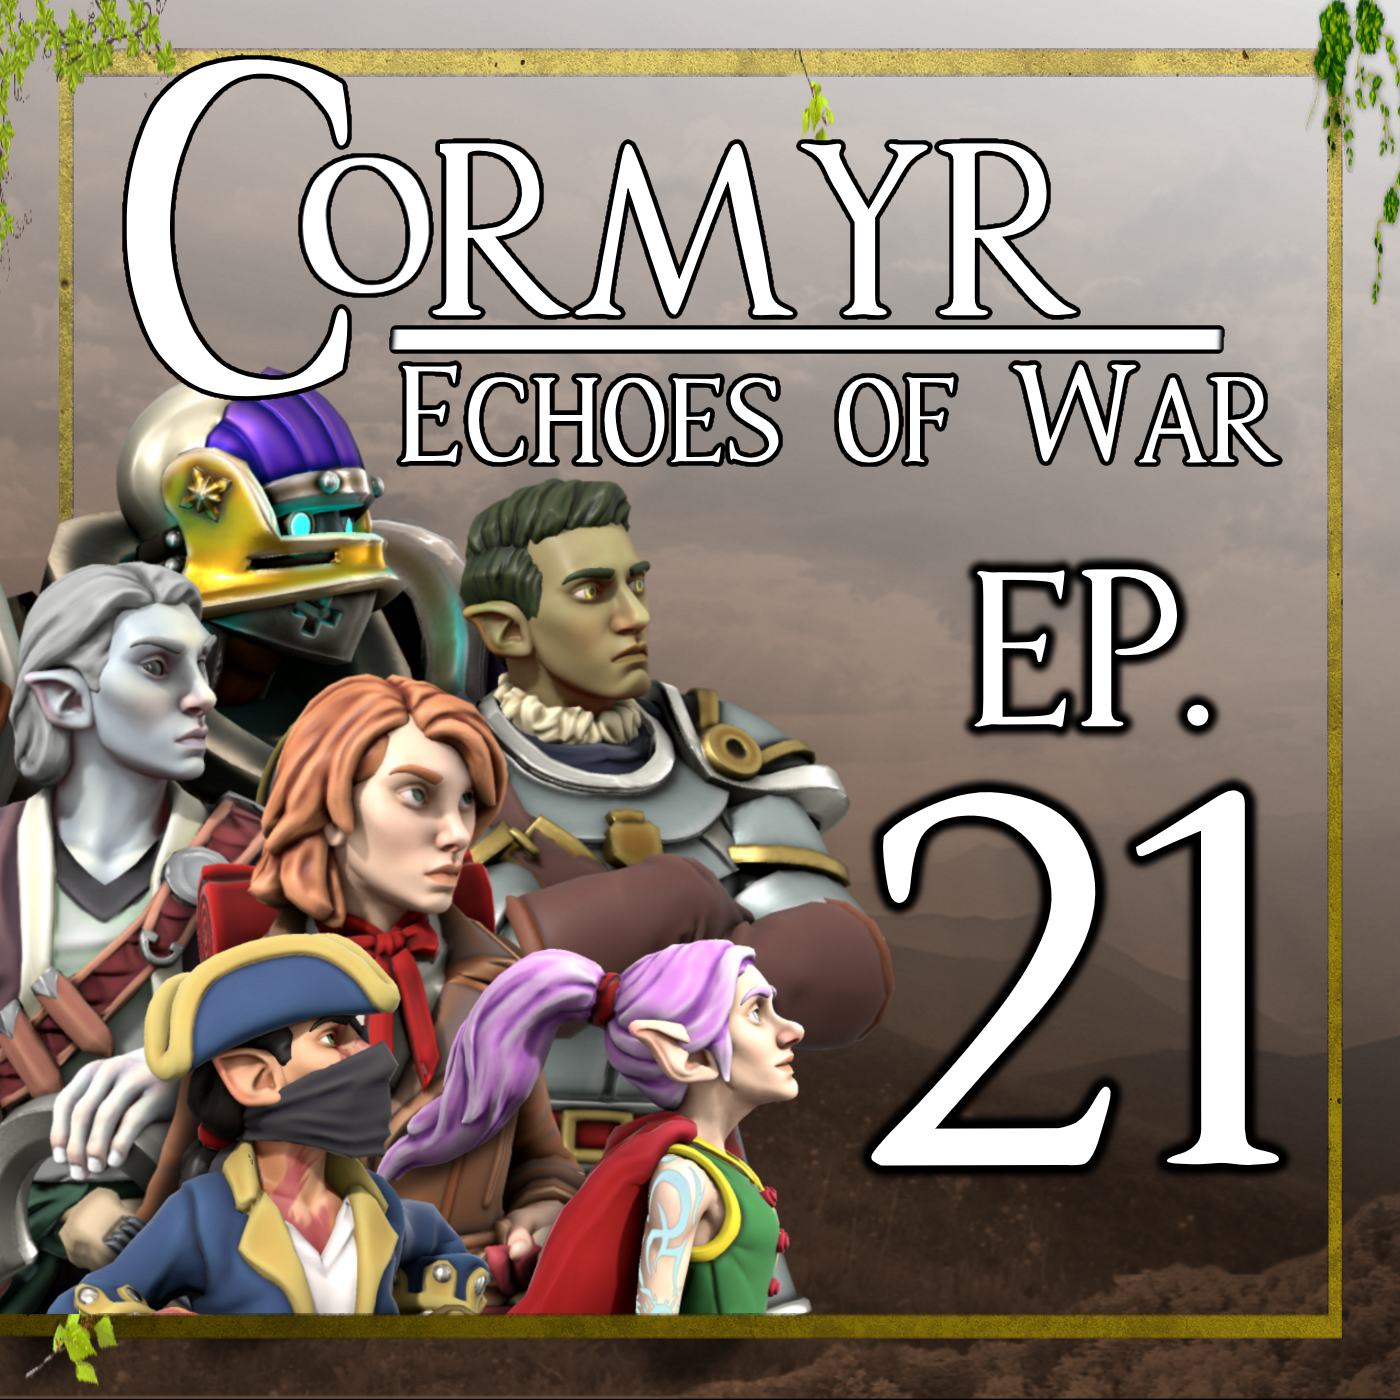 Cormyr: Echoes of War - Ep. 21 - The Ascent